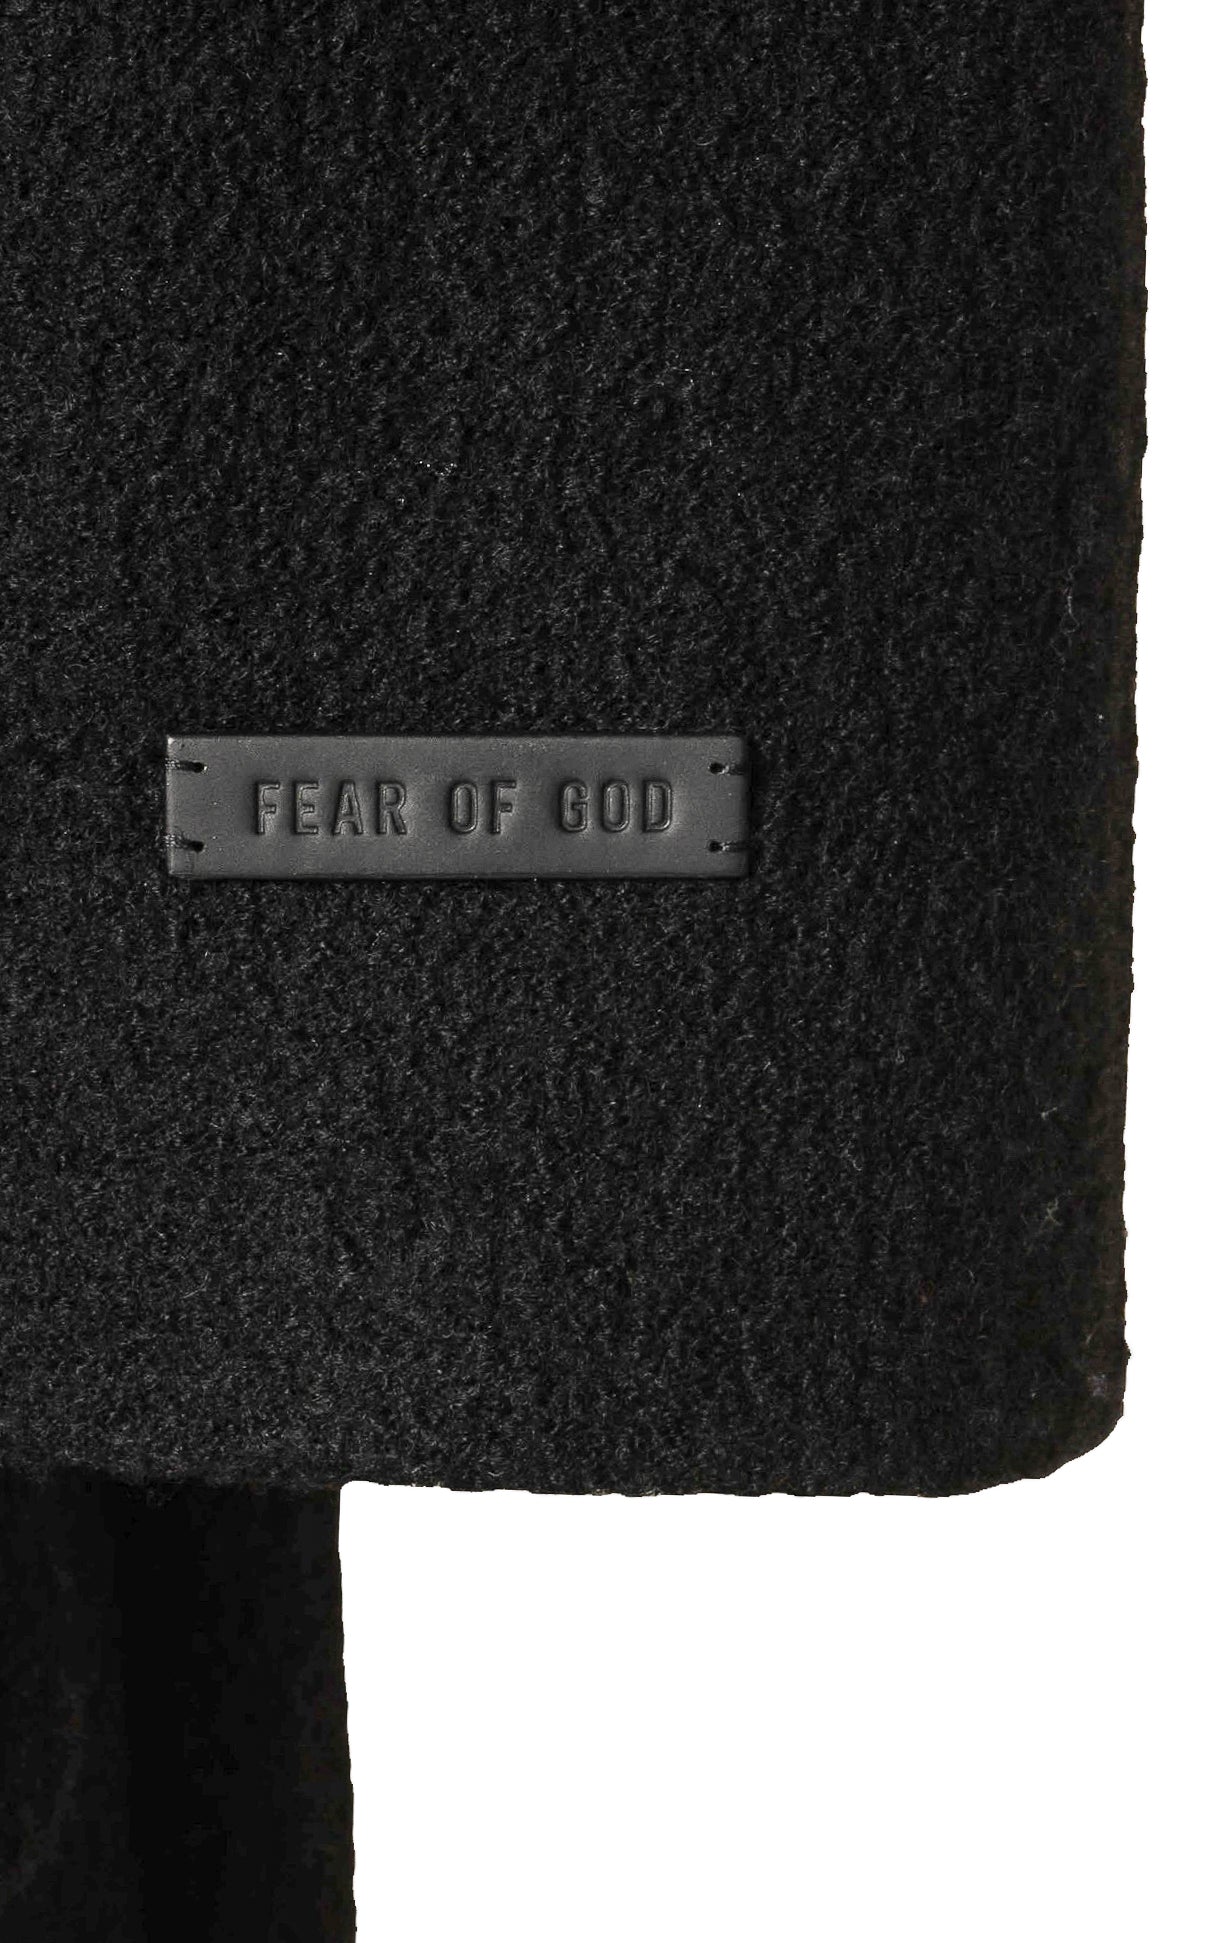 FEAR OF GOD (RARE) Coat Size: No size tags, fits like L-XL